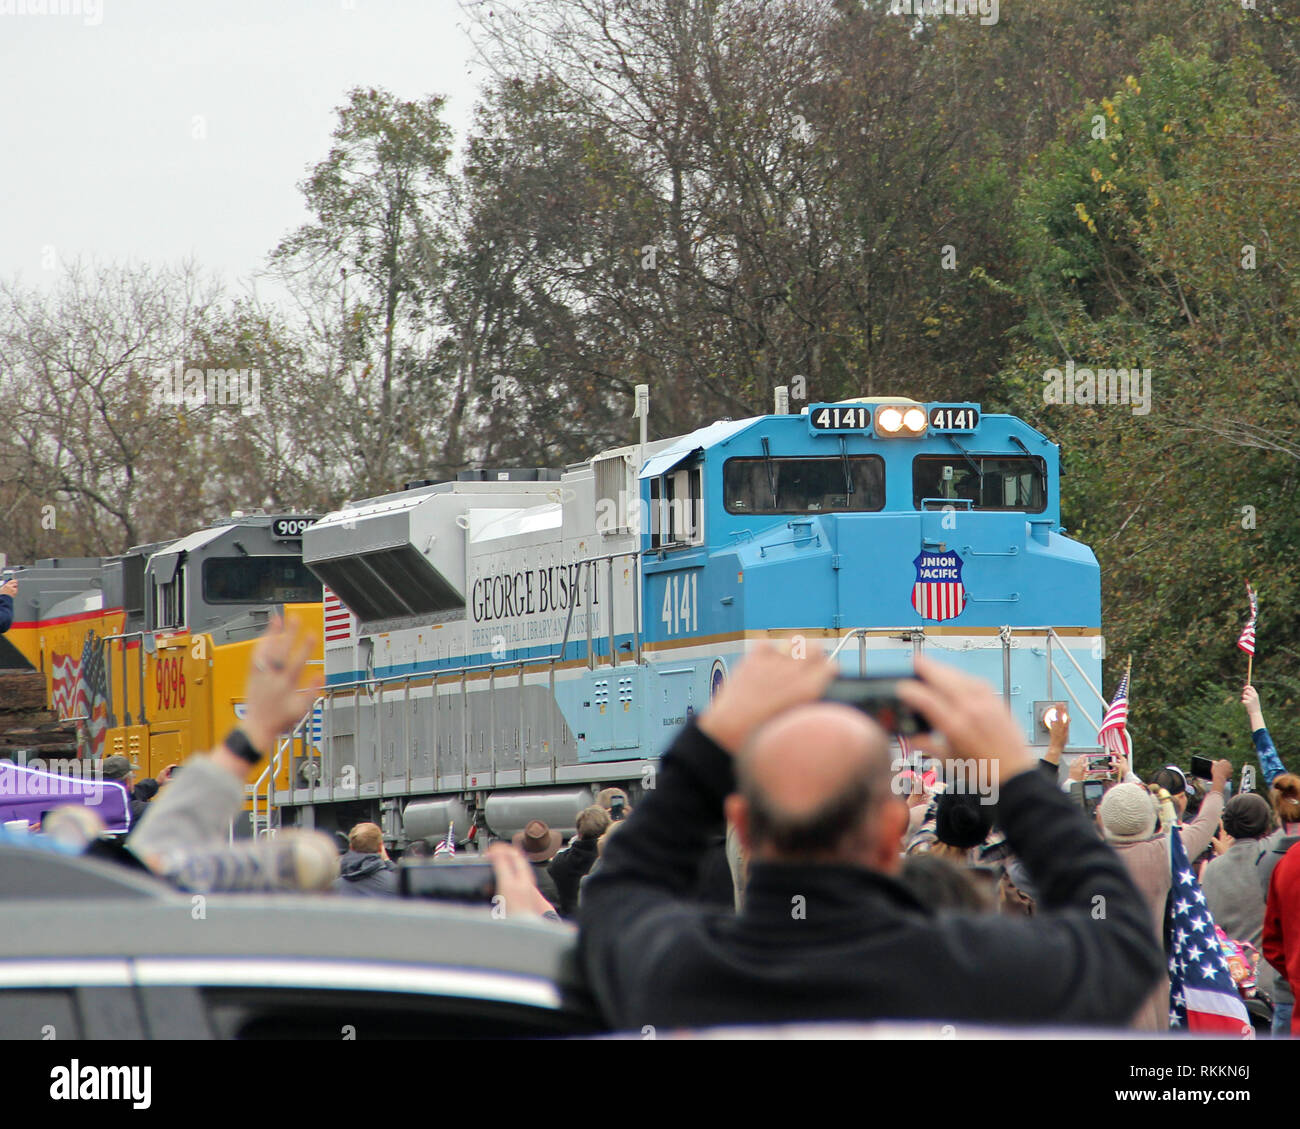 Former President George H.W. Bush funeral train passes through Tomball, Texas on its route to his presidential library at College Station. Stock Photo